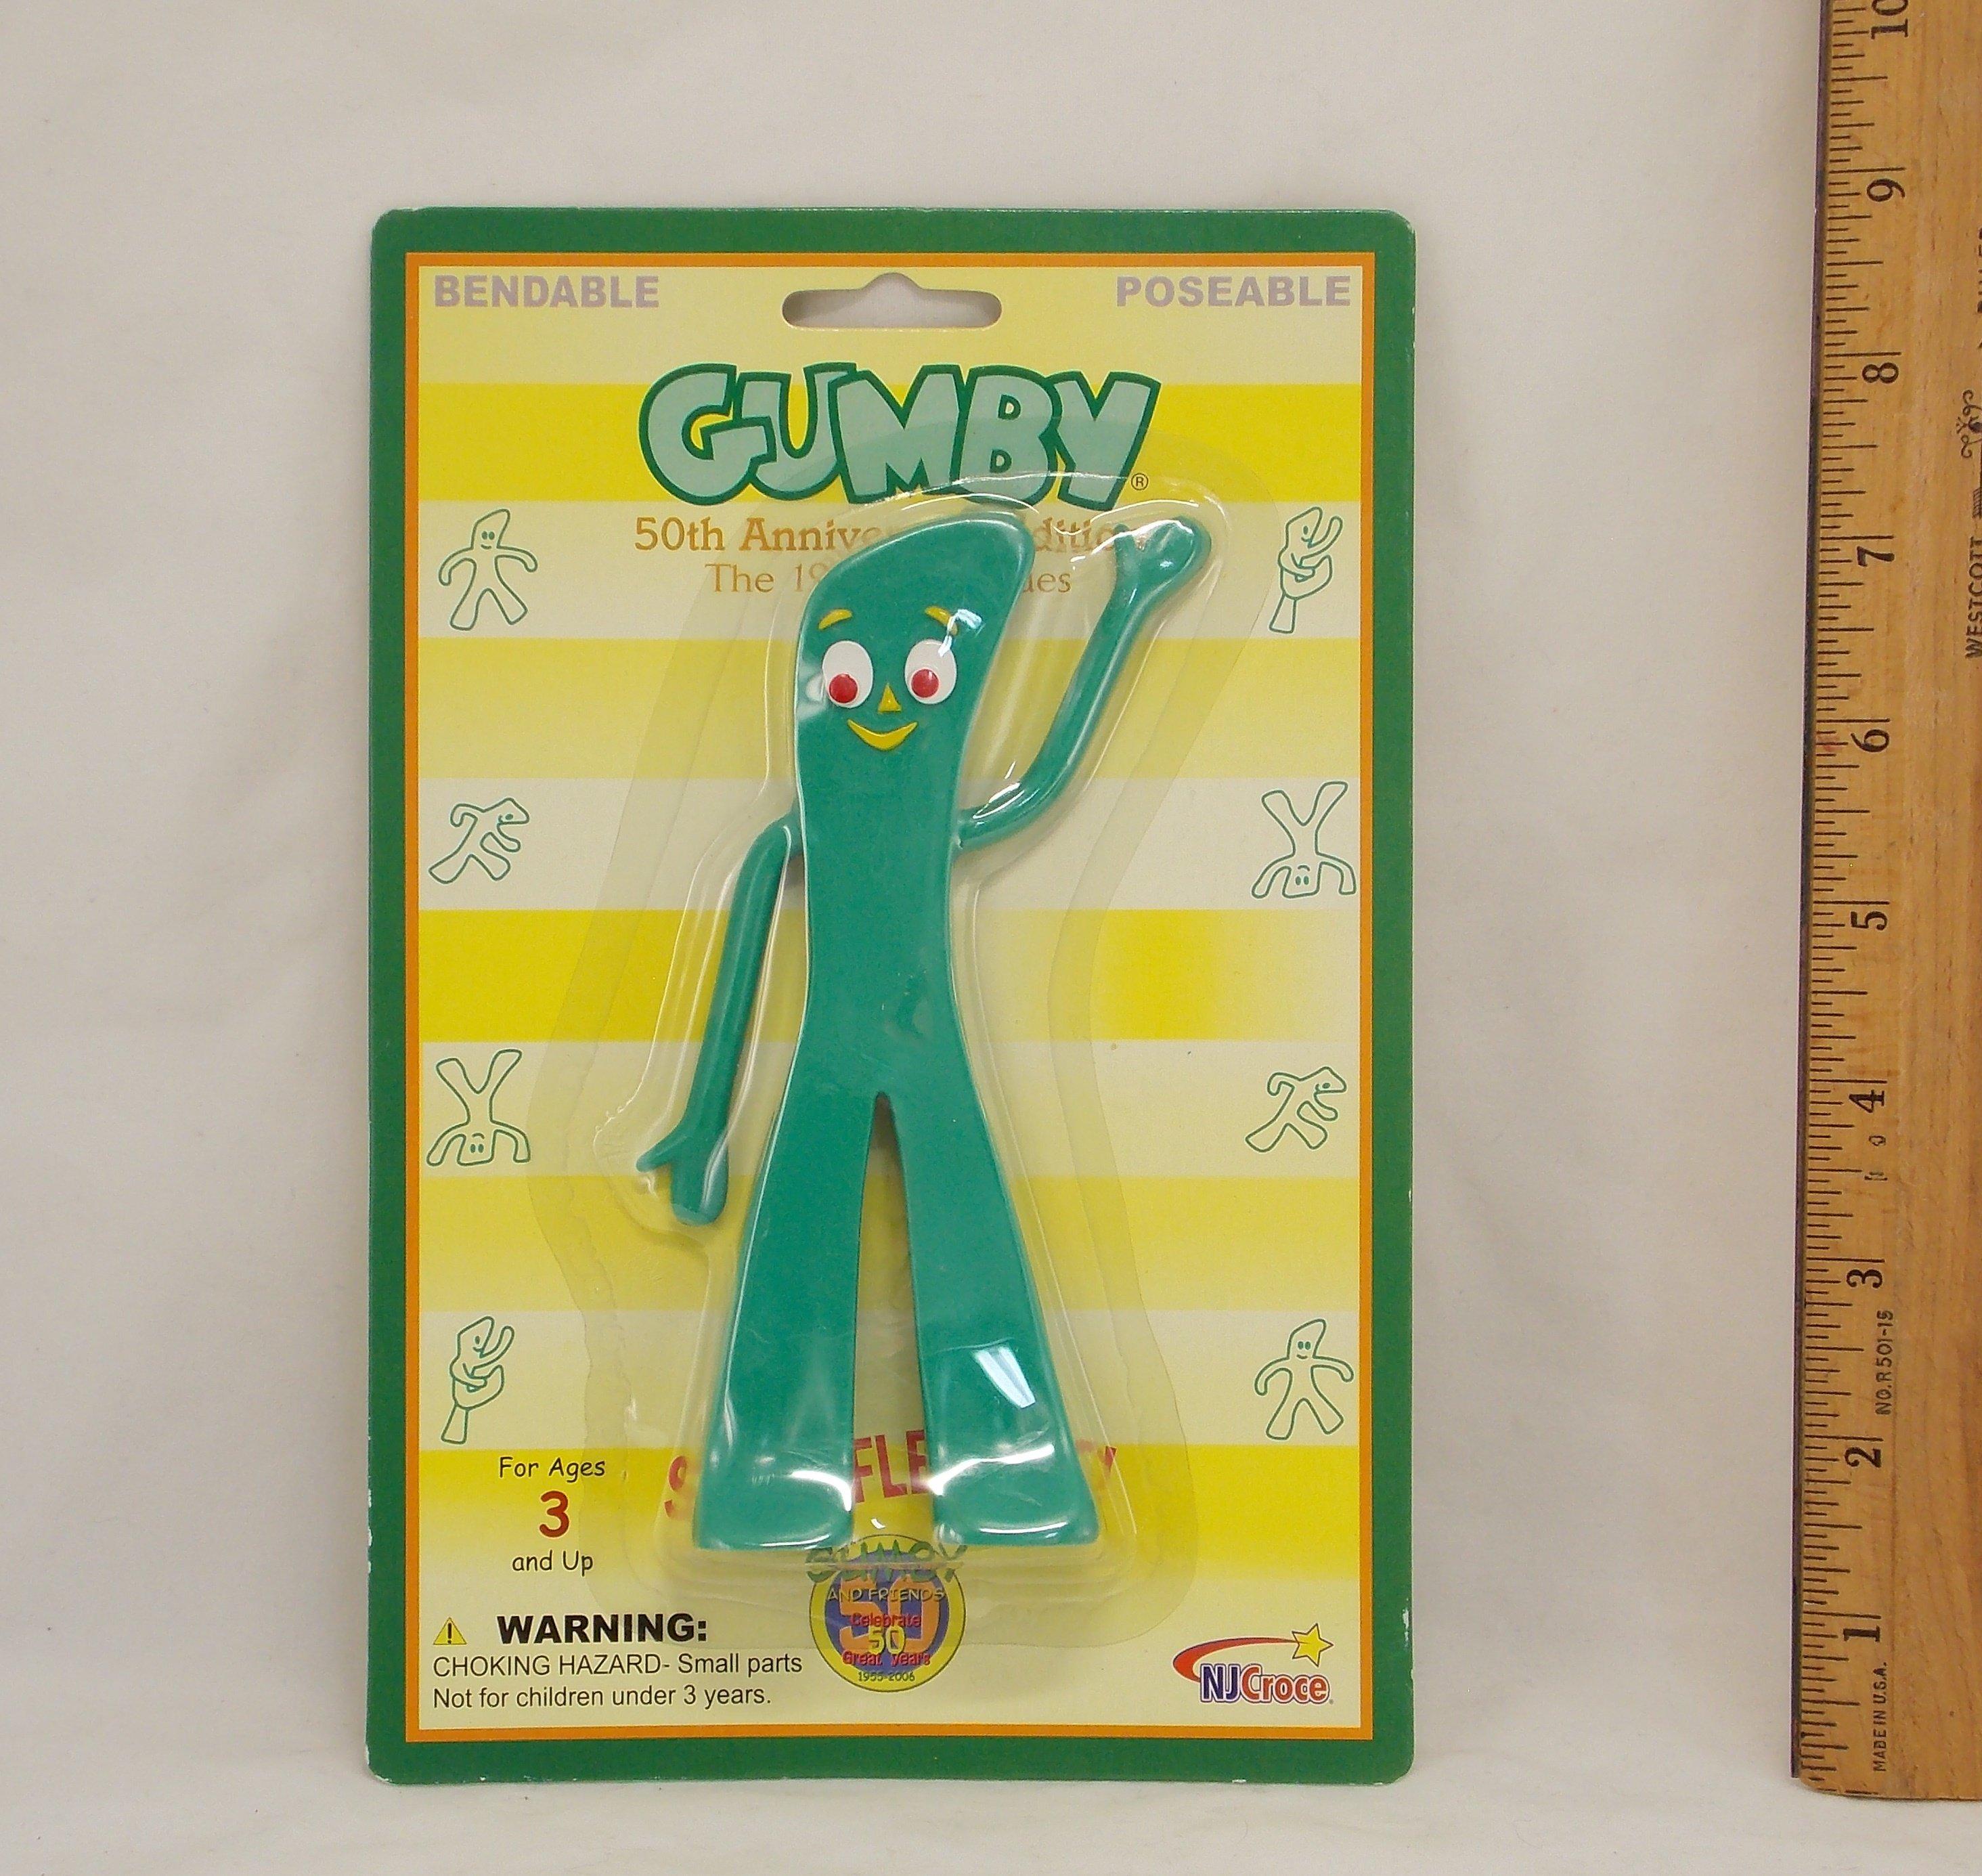 Gumby 50th Anniversary Bendable Figure